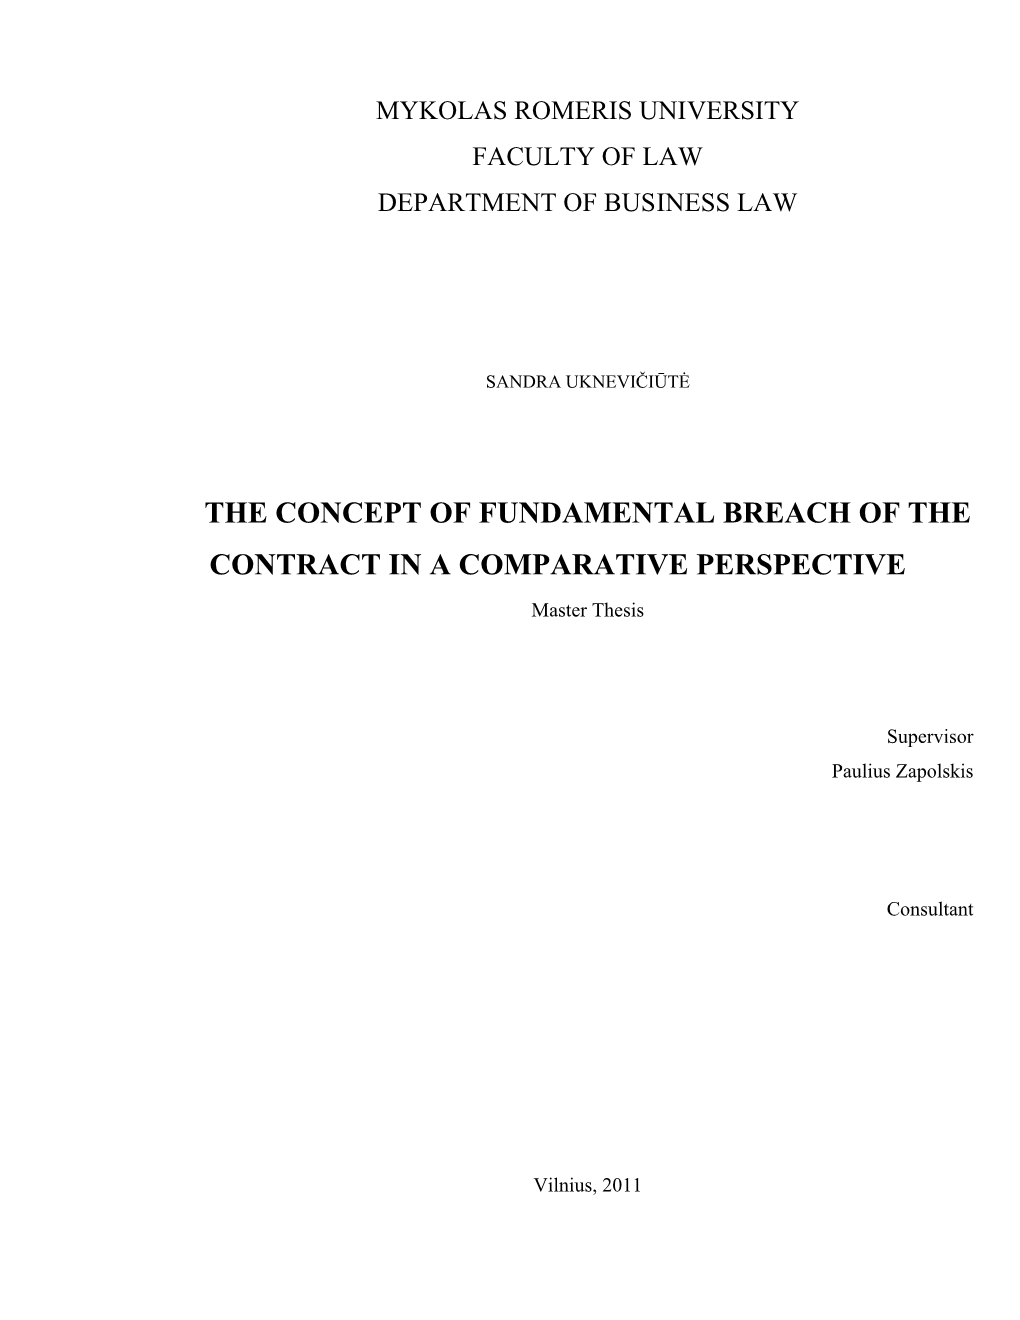 The Concept of Fundamental Breach of the Contract in a Comparative Perspective